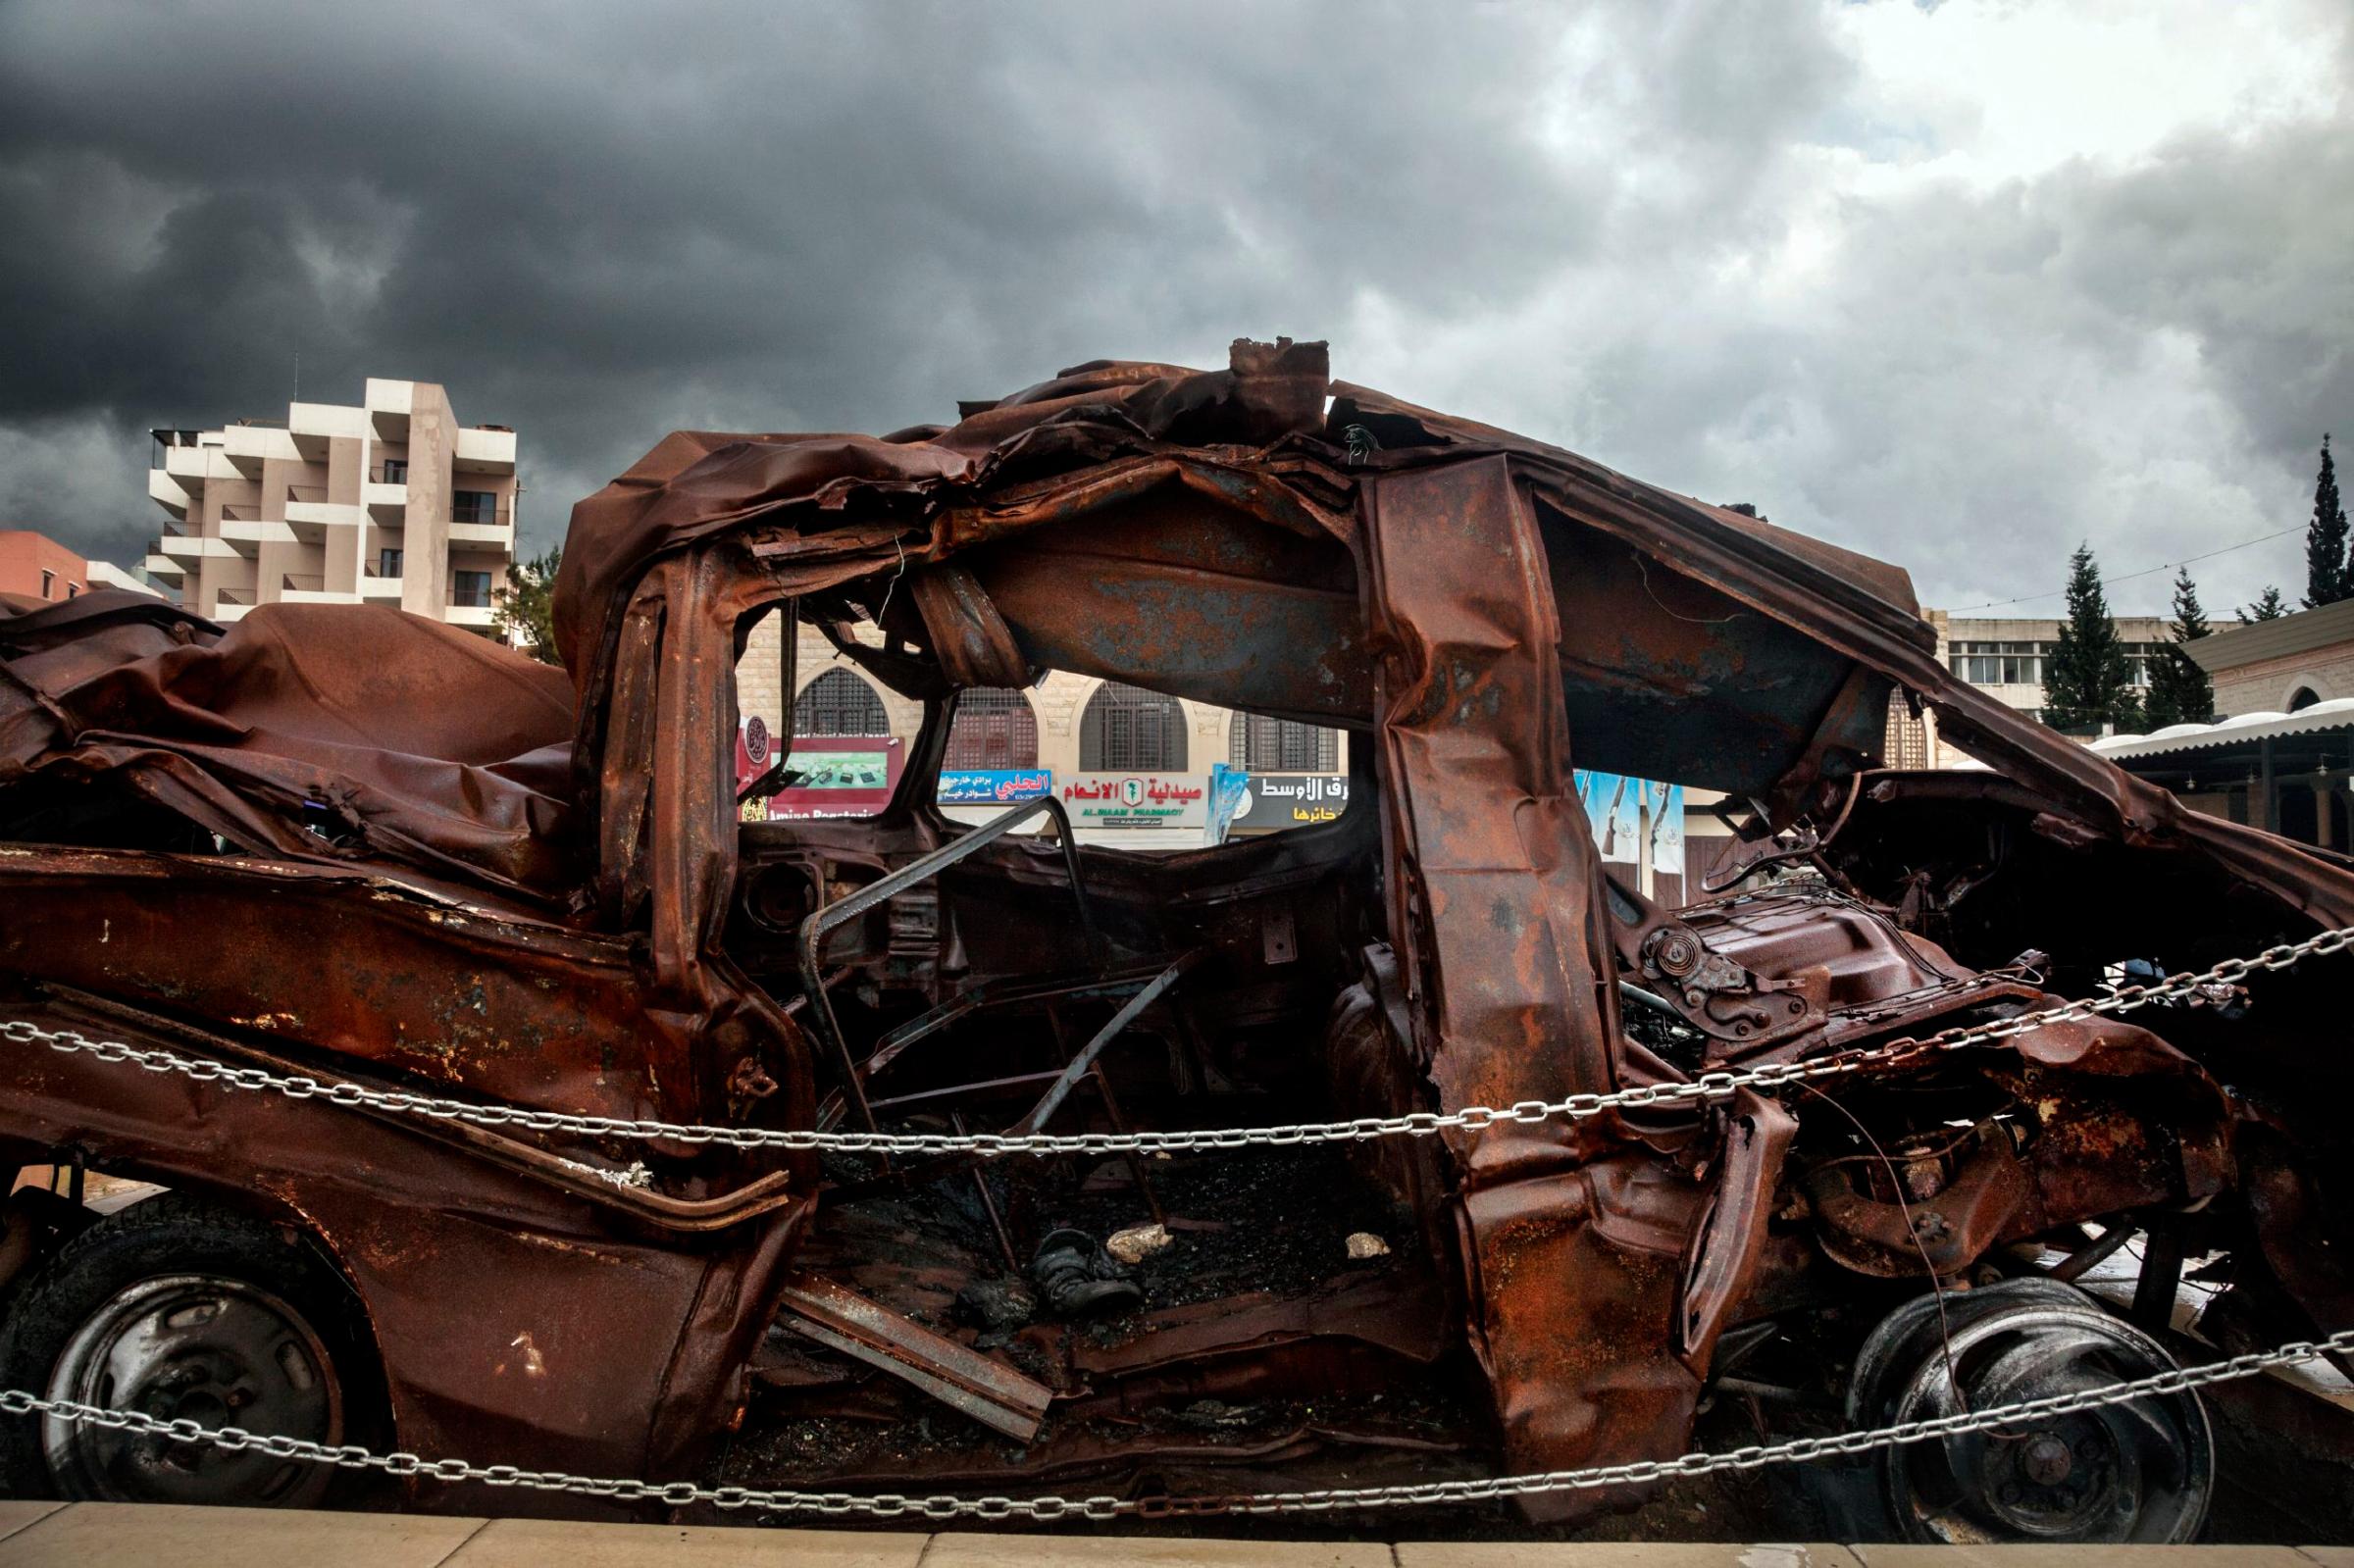 On 23 August 2013 two mosques were bombed in Tripoli, Lebanon. 47 were killed and five hundred injured in what has been called the "biggest and deadliest" bombing in Tripoli since the end of Lebanon's civil war. This is what remains of a blasted car, it has become a monument in memory of the victims. It was built in front of the Mosque Al-Taqwa.Tripoli Lebanon November/December 2014